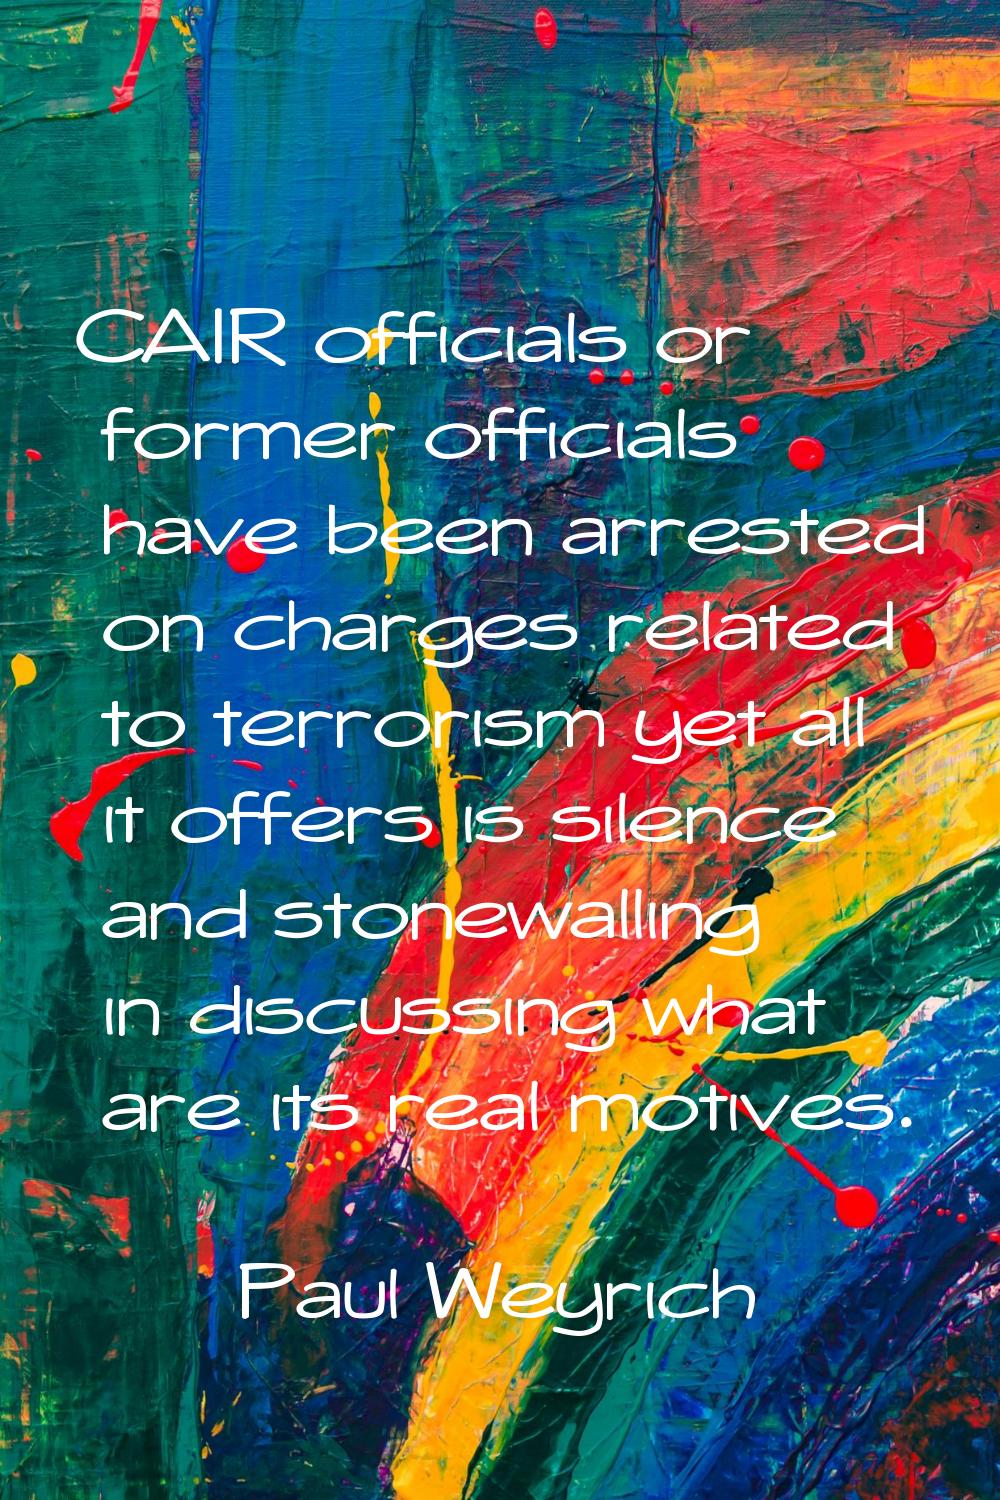 CAIR officials or former officials have been arrested on charges related to terrorism yet all it of